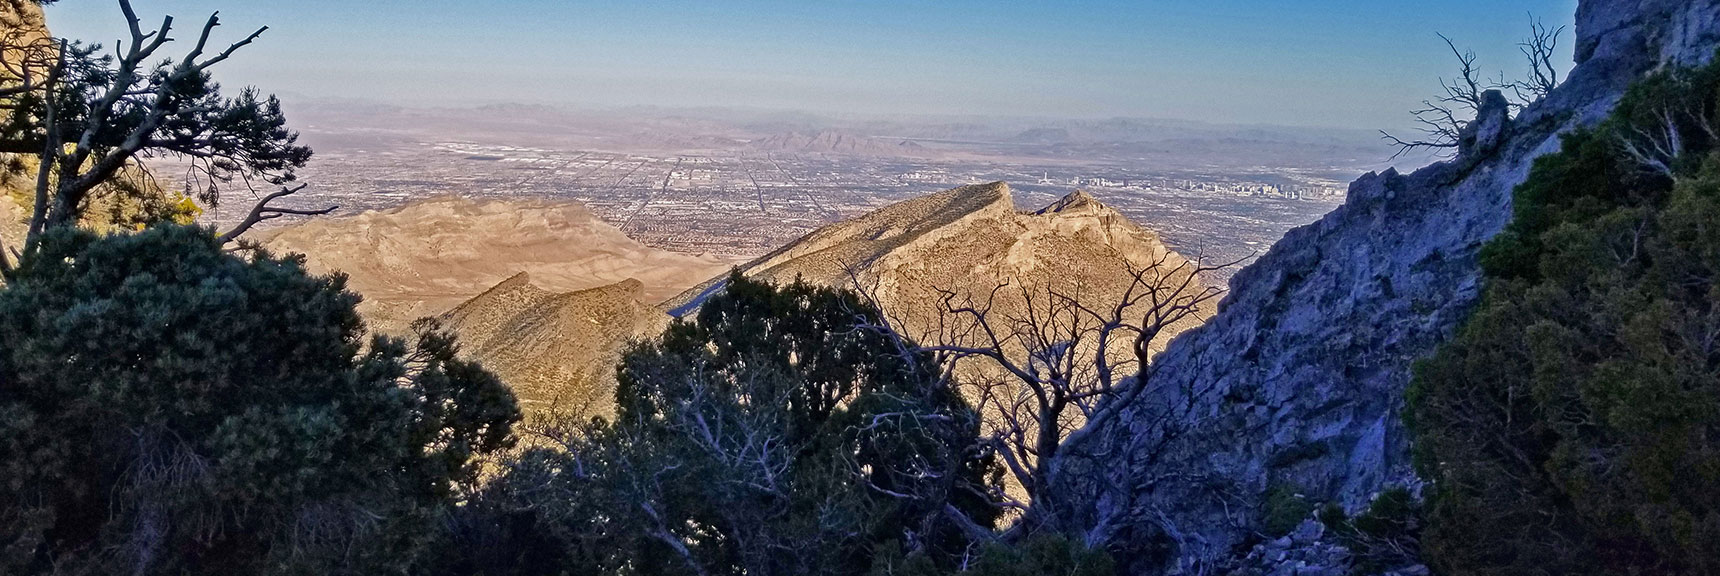 Damsel Peak and Las Vegas Valley from Notch Between La Madre and El Padre Mts | La Madre Mountain,, El Padre Mountain, Burnt Peak | La Madre Mountains Wilderness, Nevada